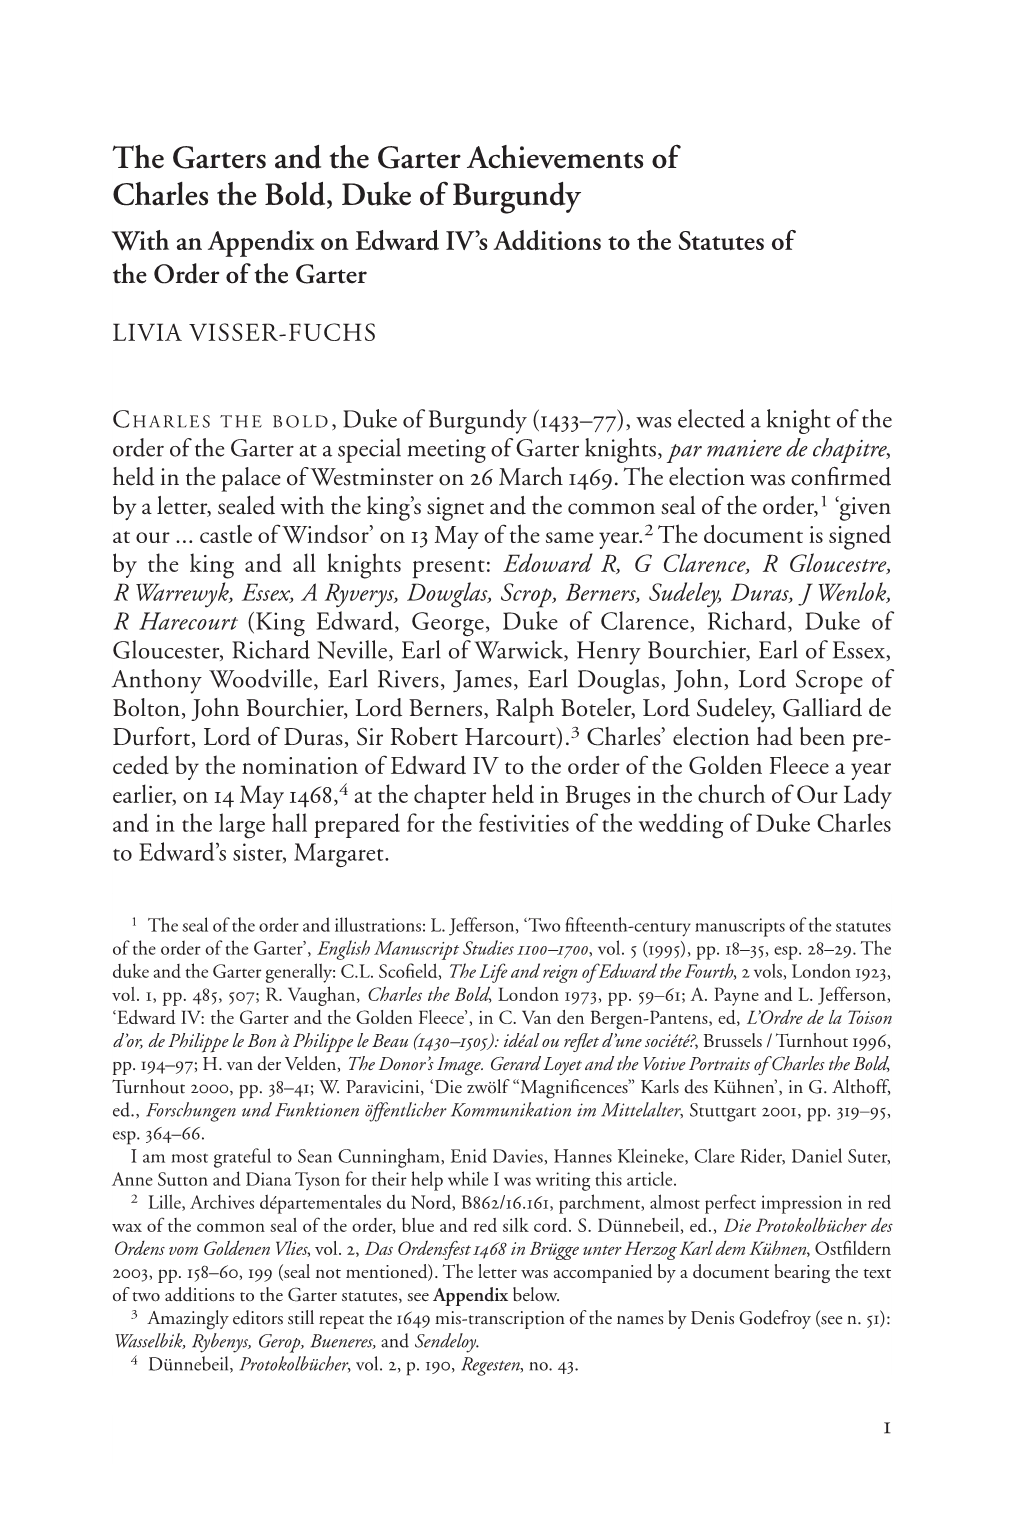 The Garters and the Garter Achievements of Charles the Bold, Duke of Burgundy with an Appendix on Edward IV’S Additions to the Statutes of the Order of the Garter